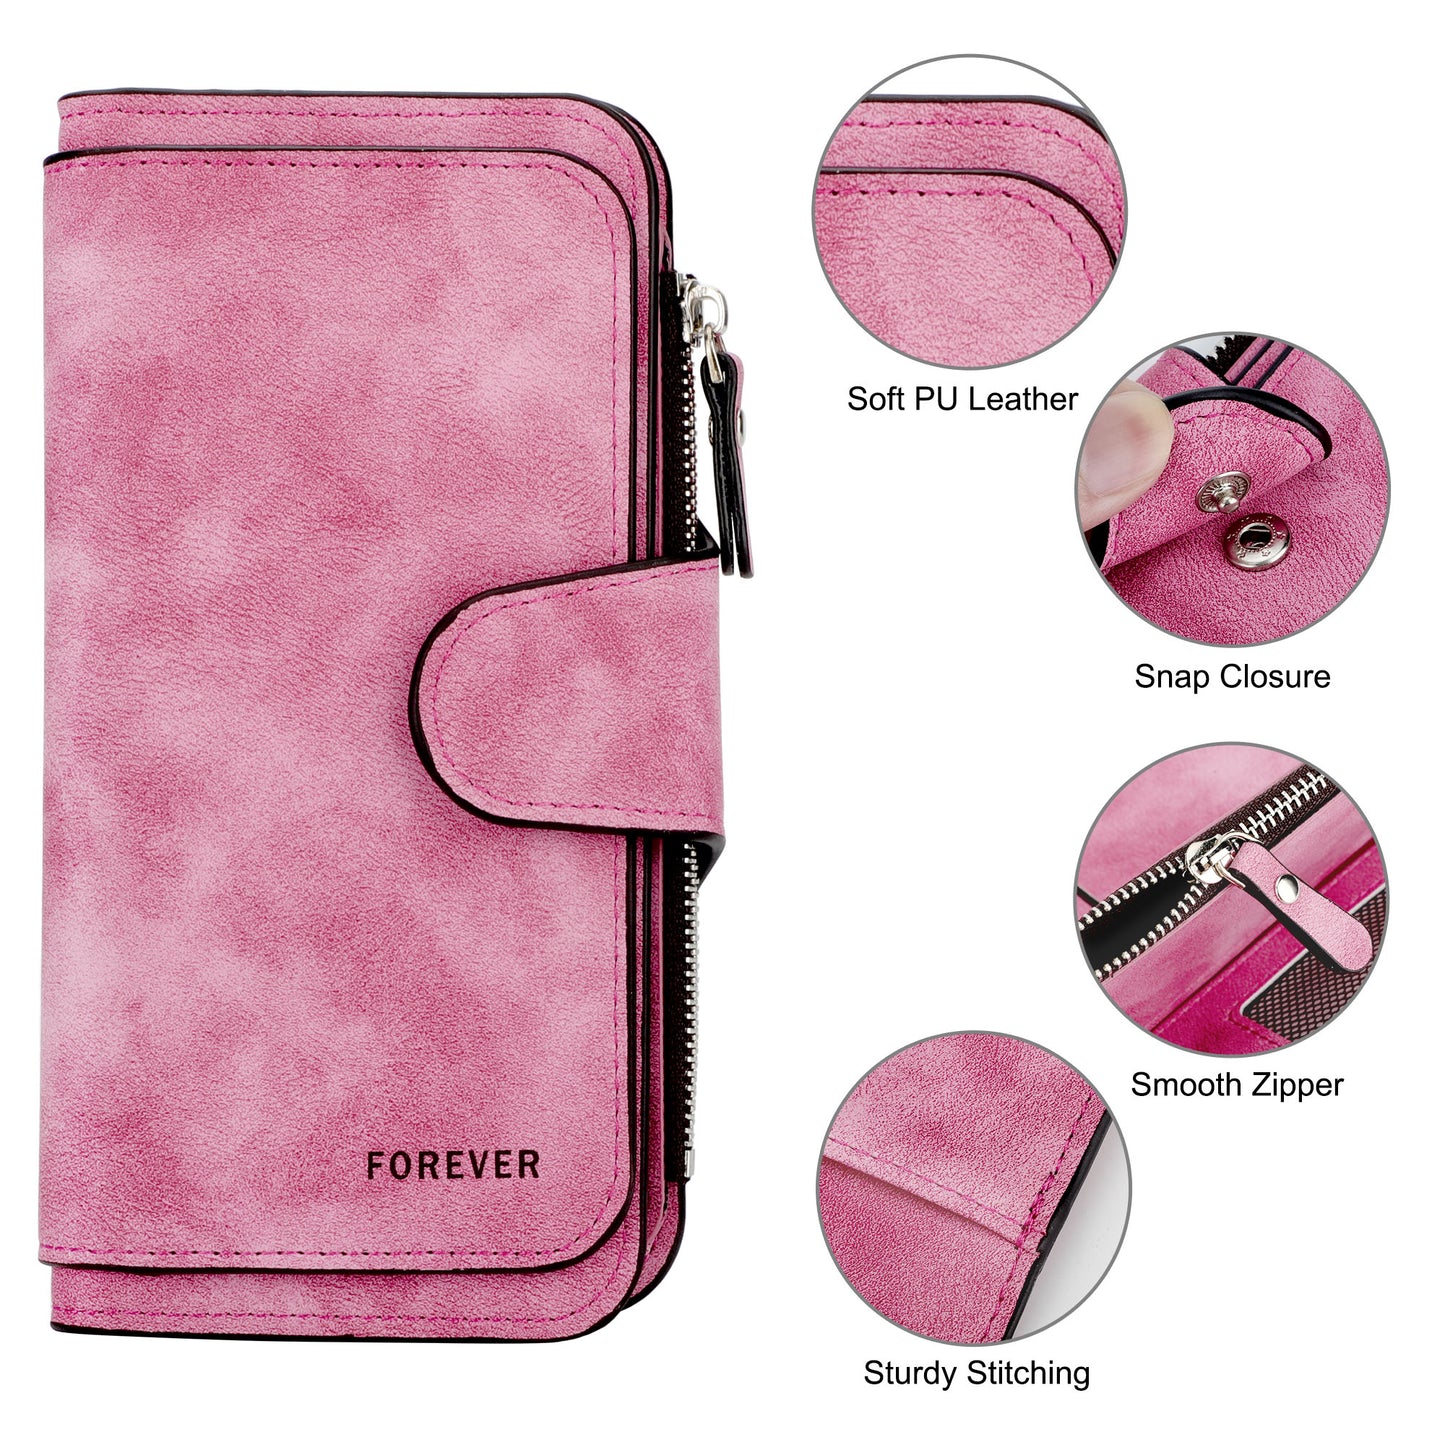 New Womens PU Leather long Trifold Clutch Wallet - Multifunction Purse Card Holders with Zipper,Ladies Phone Clutch,Large Capacity Purse,Gift for Mother's Day, Christmas, Valentine's Day (Rose Red)